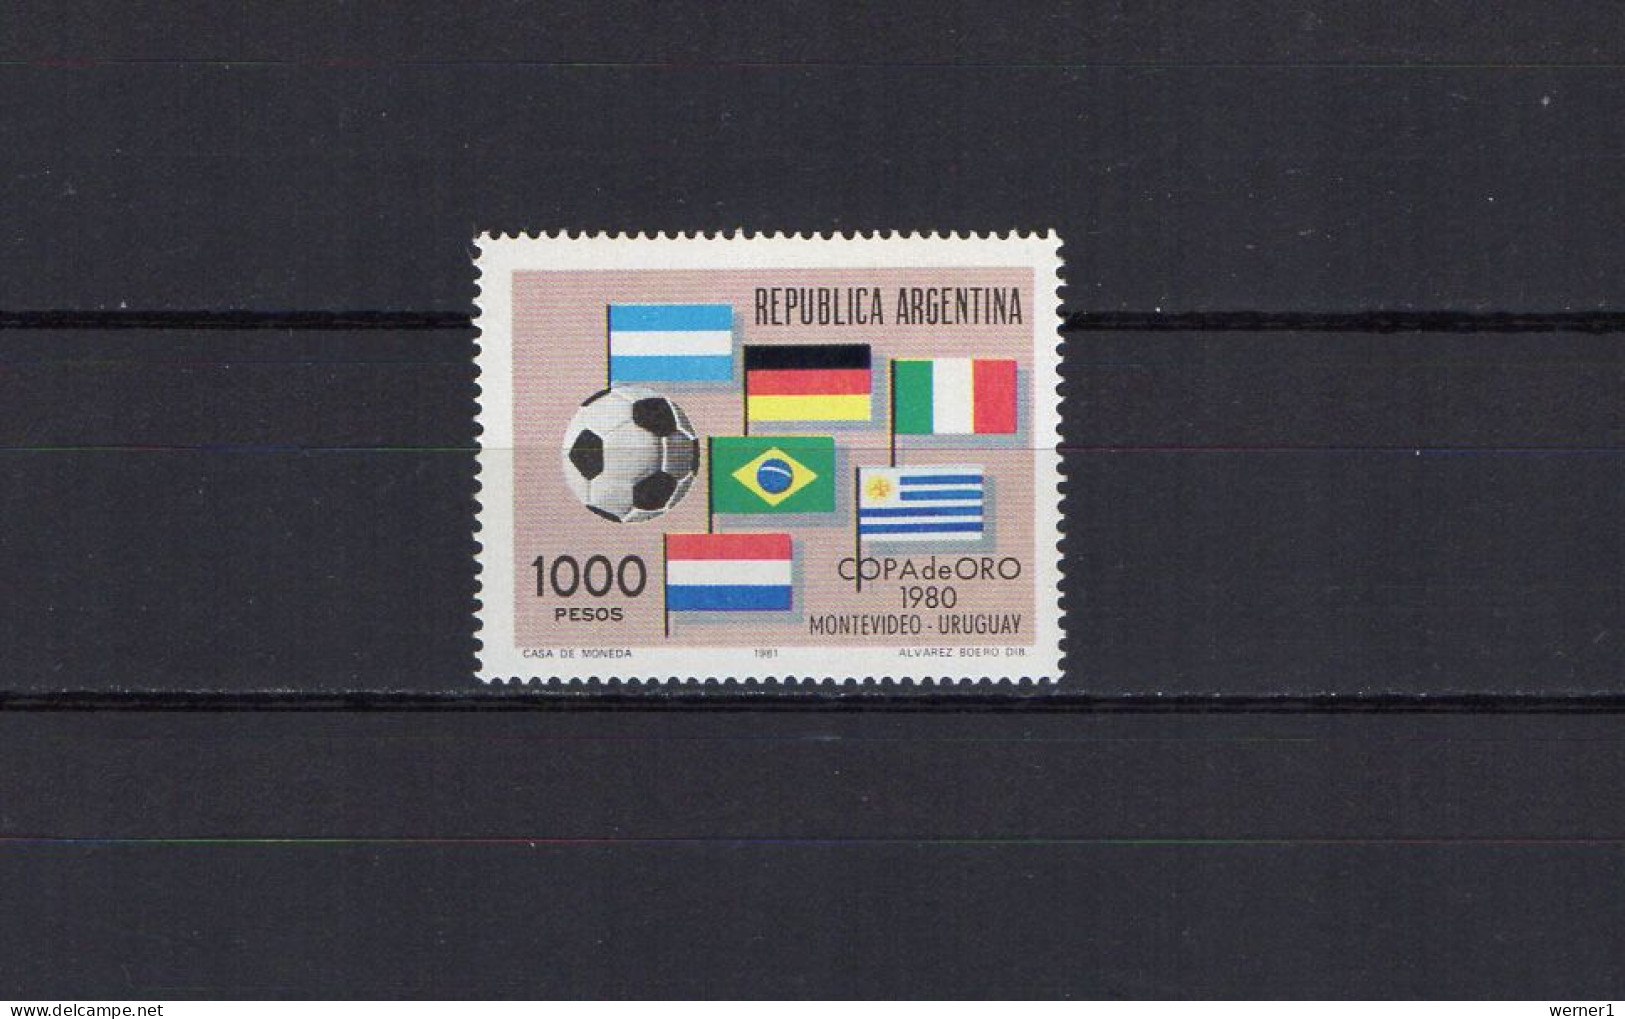 Argentina 1981 Football Soccer Gold Cup Stamp MNH - Coppa America